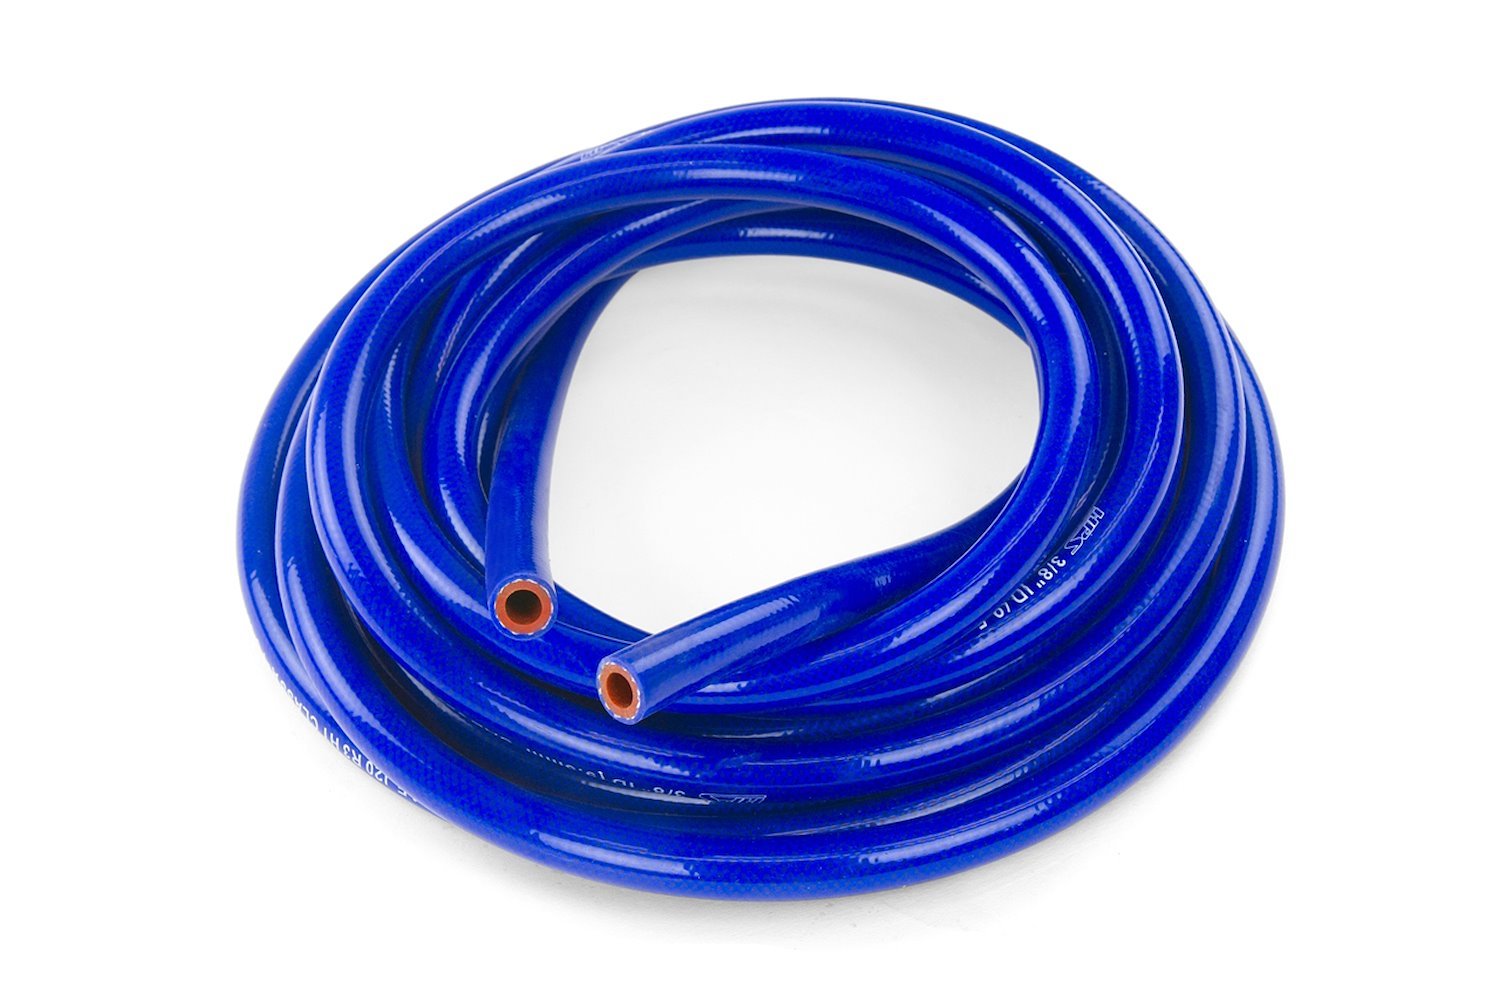 HTHH-038-BLUEx25 Silicone Heater Hose Tubing, High-Temp 1-Ply Reinforced, 3/8 in. ID, 25 ft. Roll, Blue